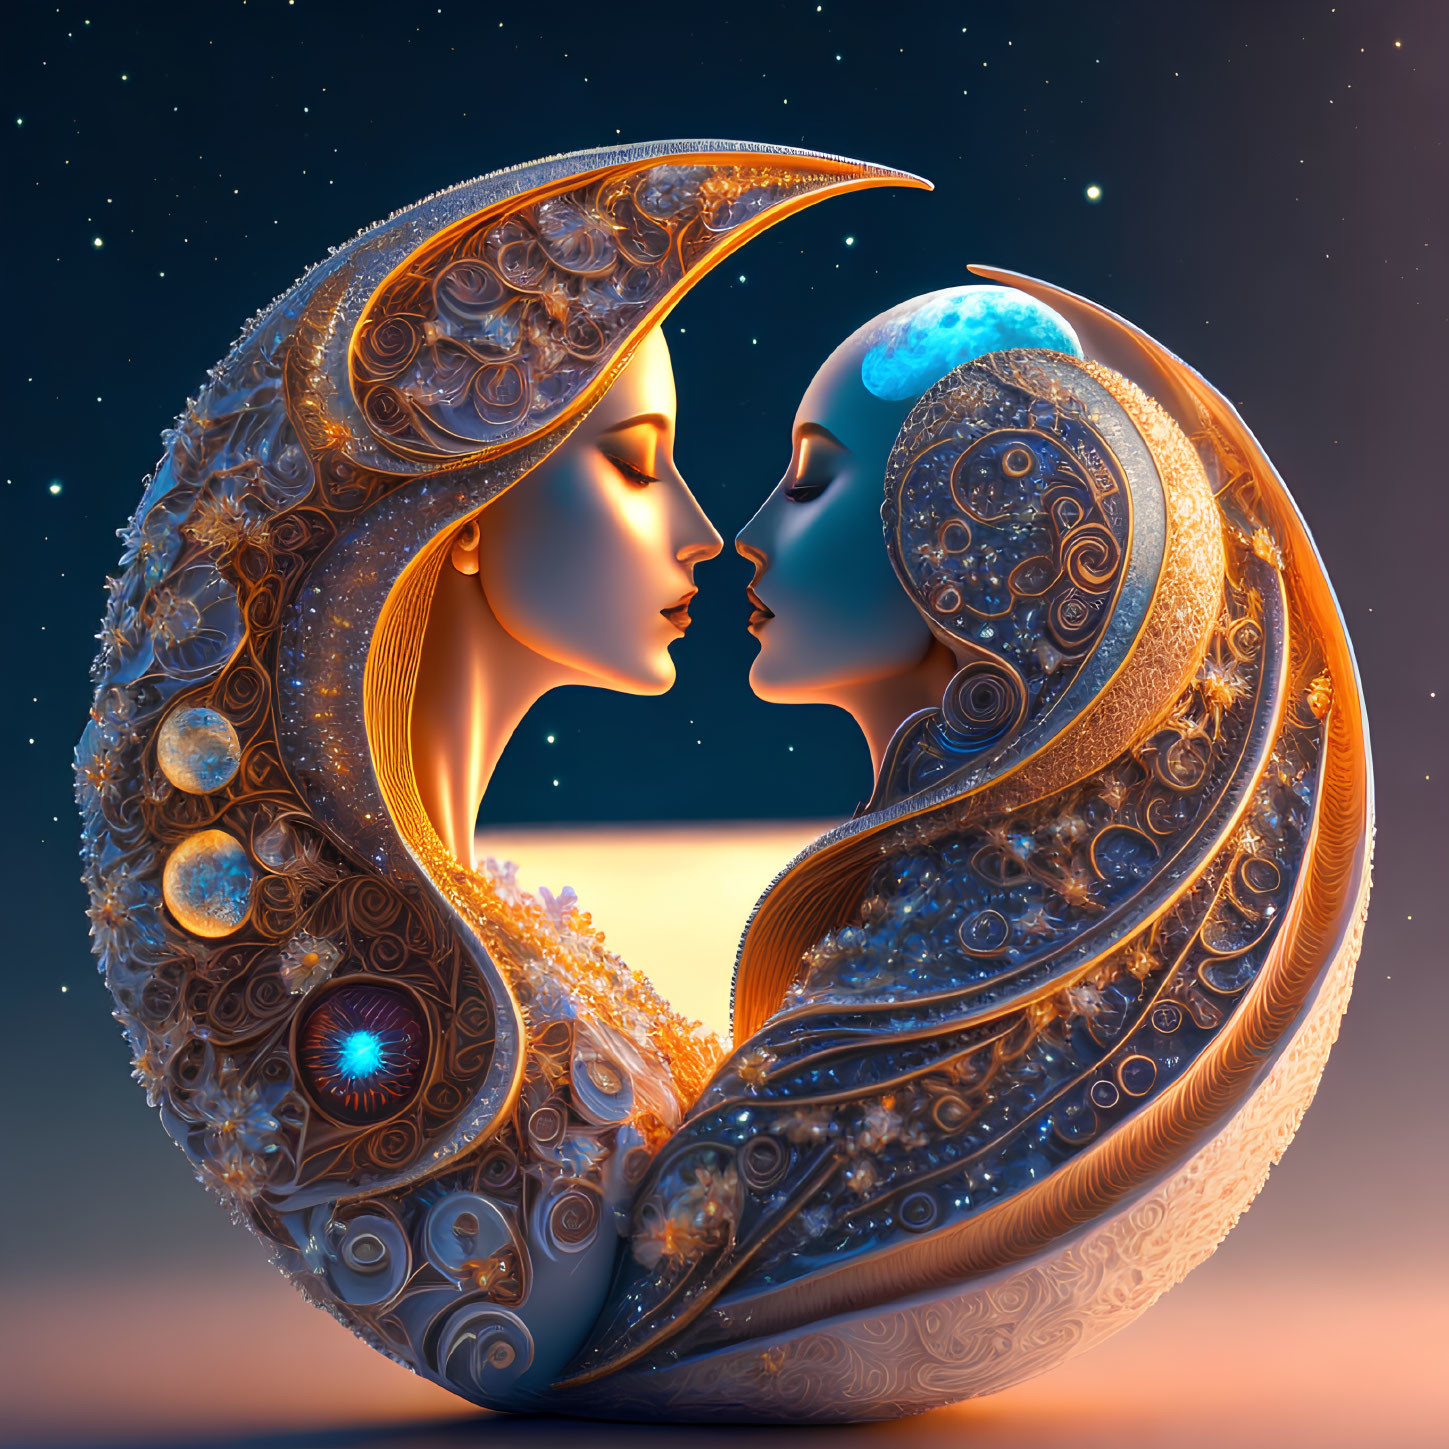 Intricately detailed digital artwork of two faces in profile against starry sky backdrop